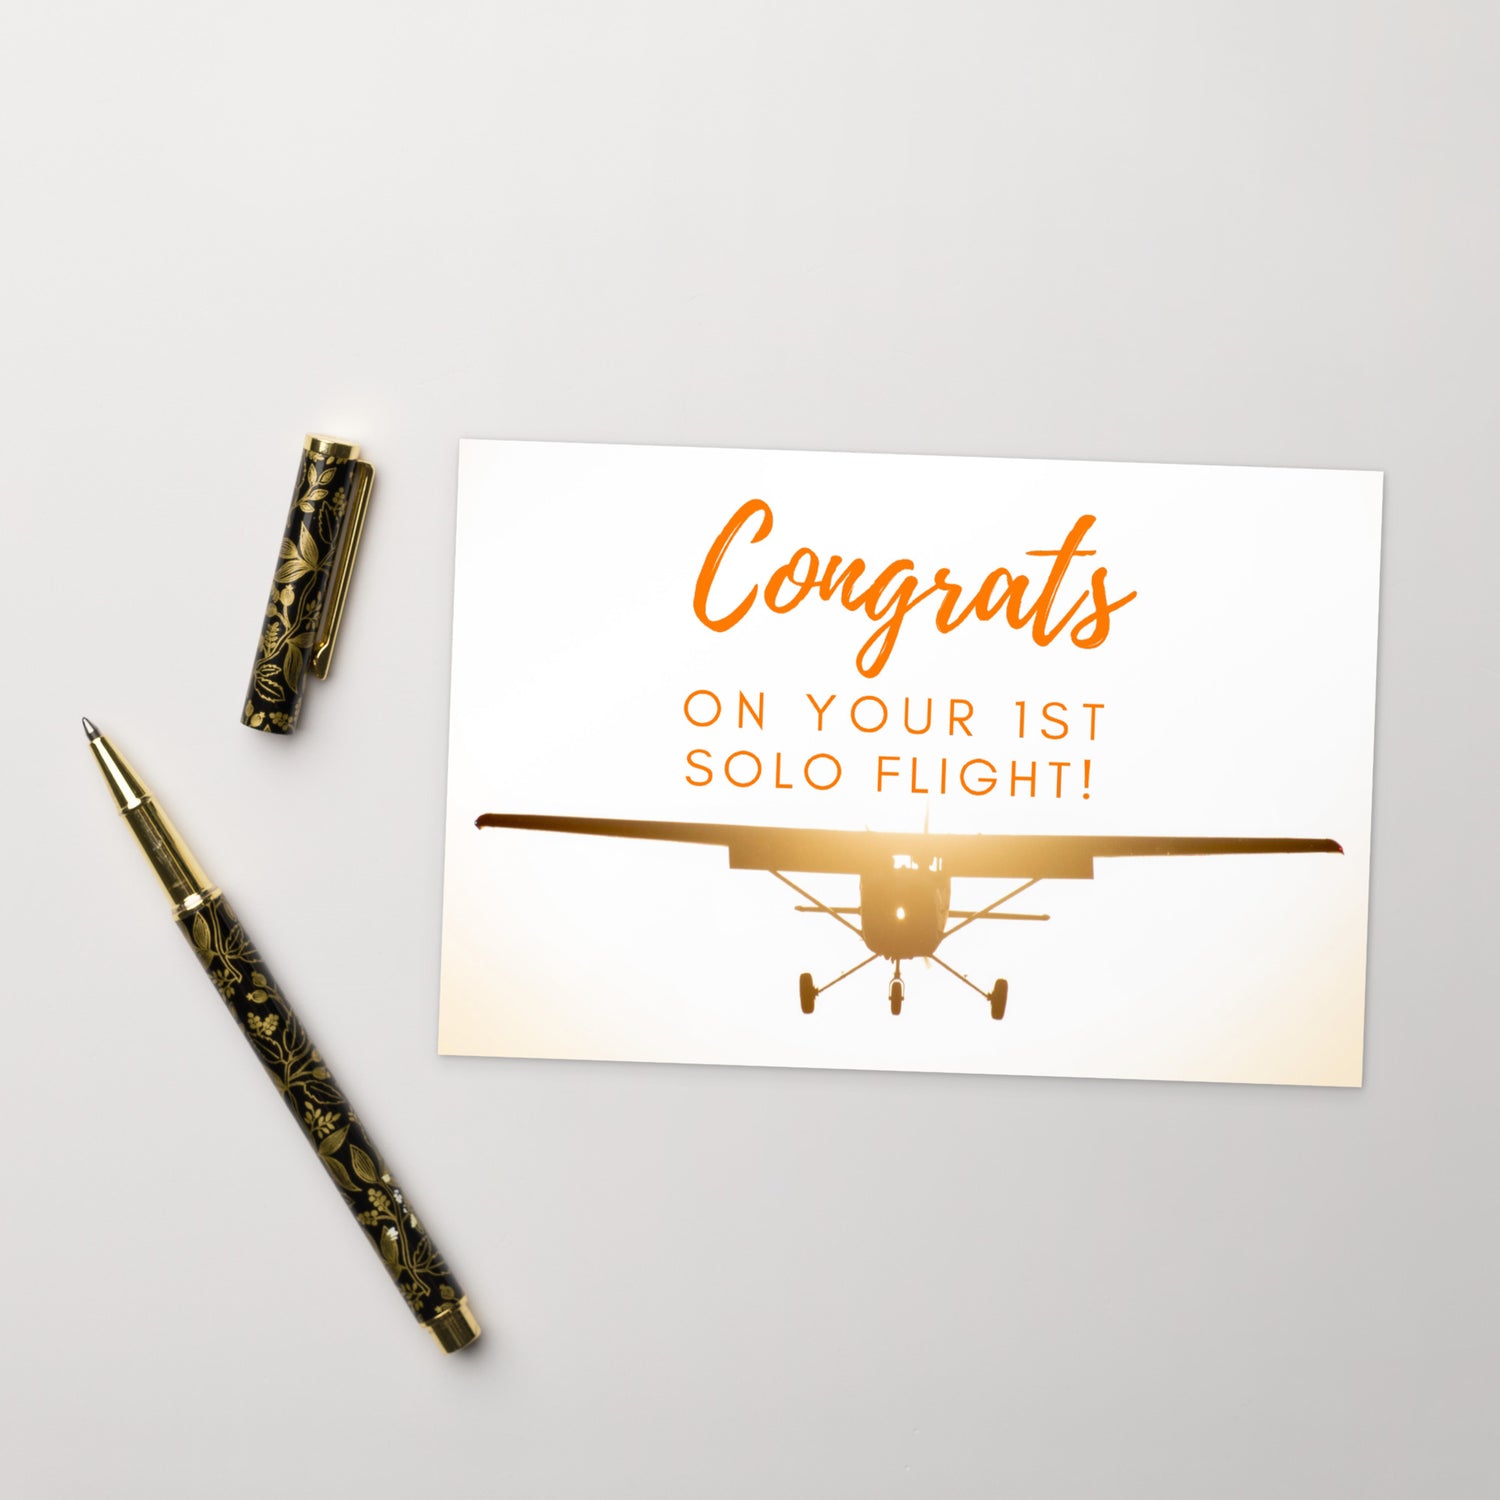 Congrats on your 1st Solo Flight! - postcard (sunset)